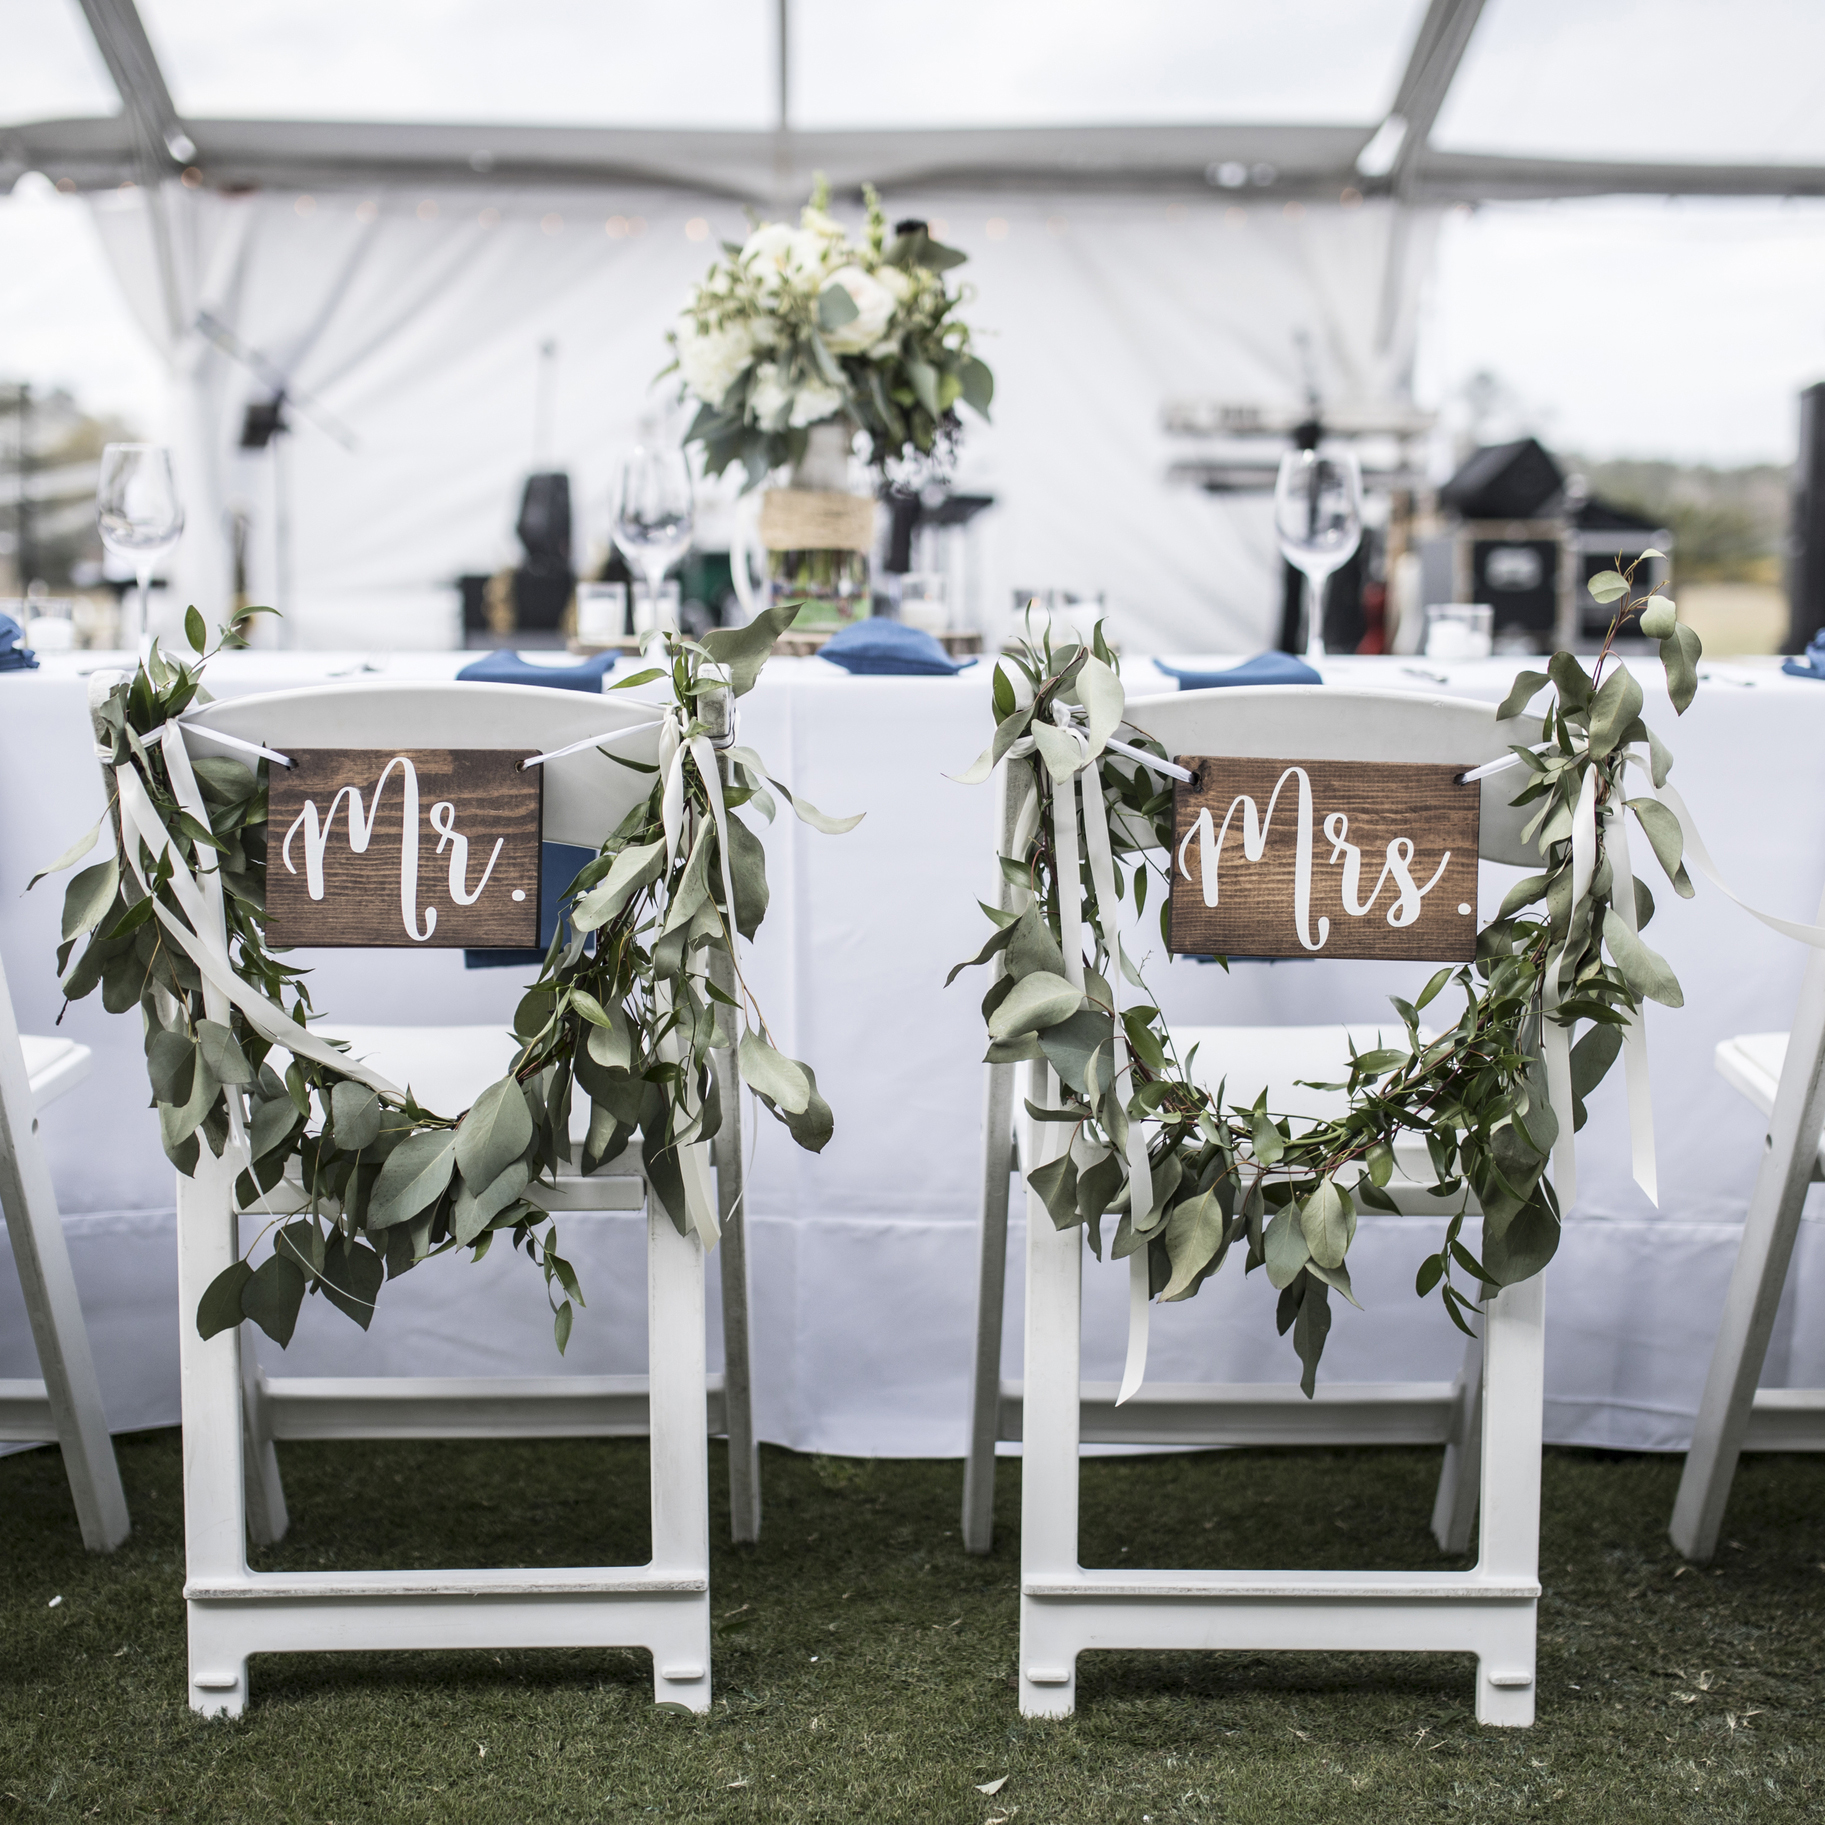 Mr & Mrs wedding chairs square pic